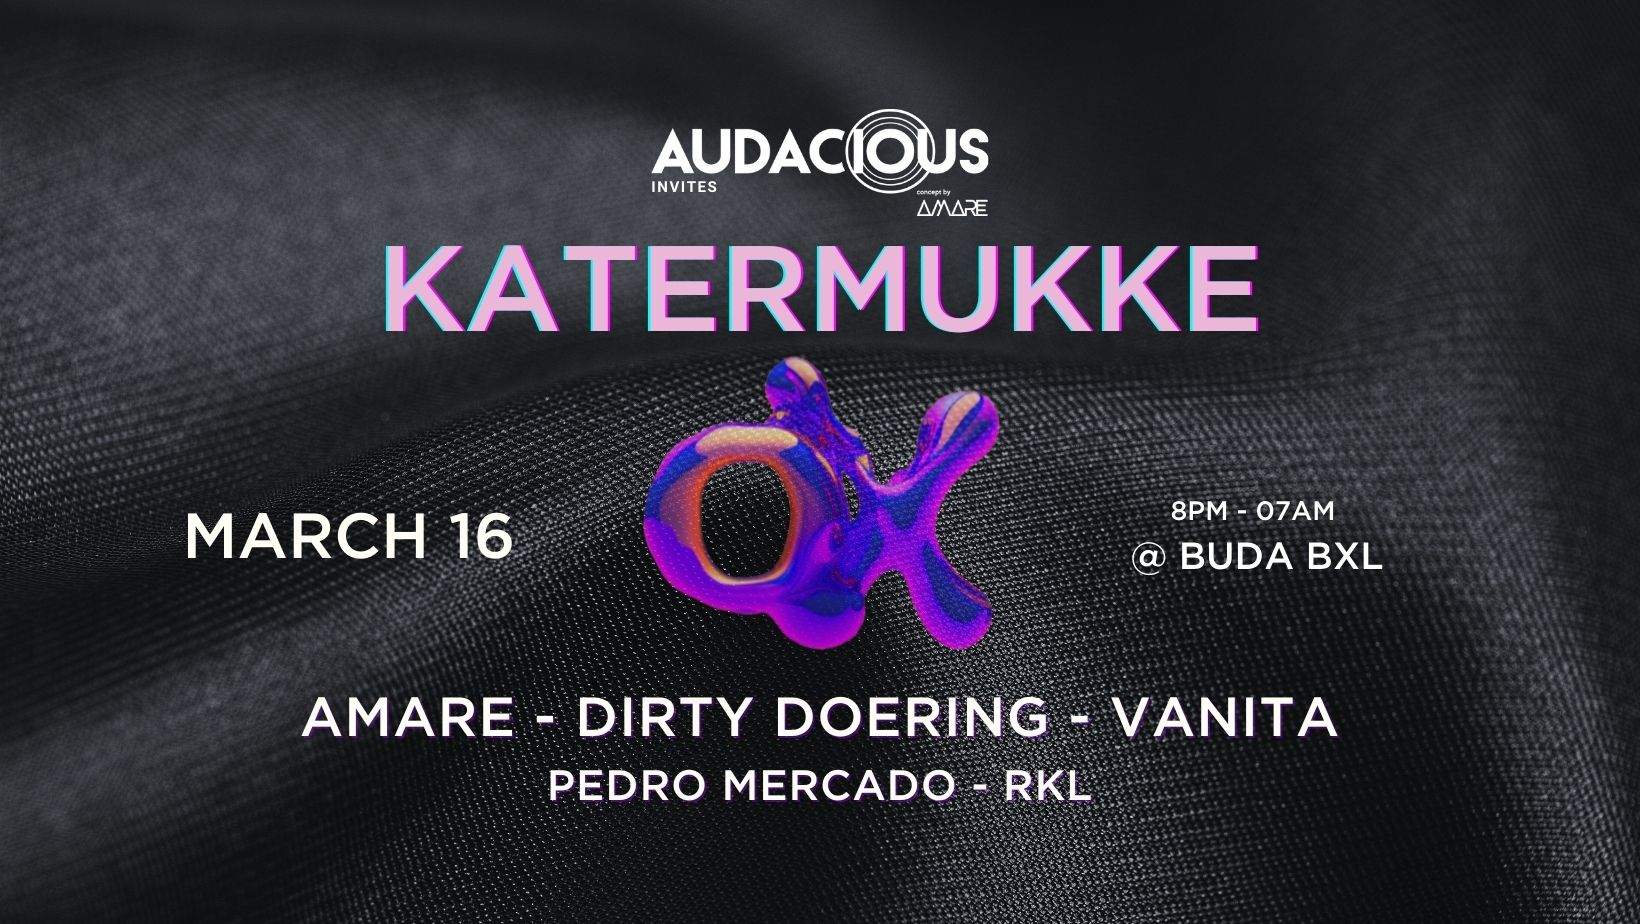 Audacious invites KATERMUKKE with Dirty Doering - フライヤー表